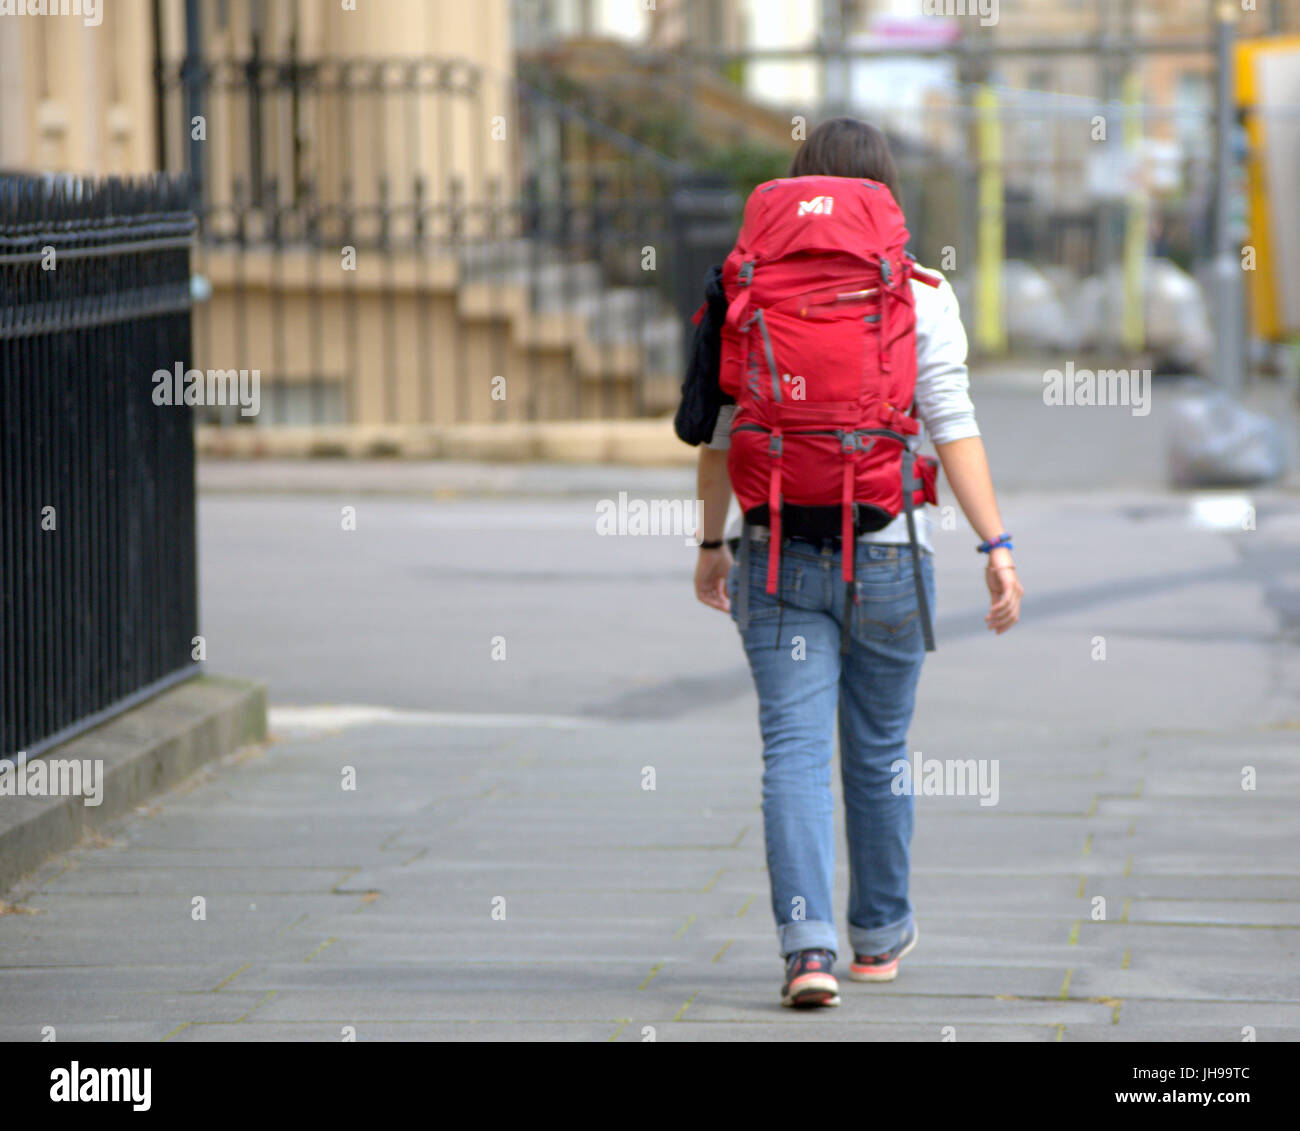 park circus youth hostel Glasgow young girl walking on street traveler tourist with rucksack from behind Stock Photo